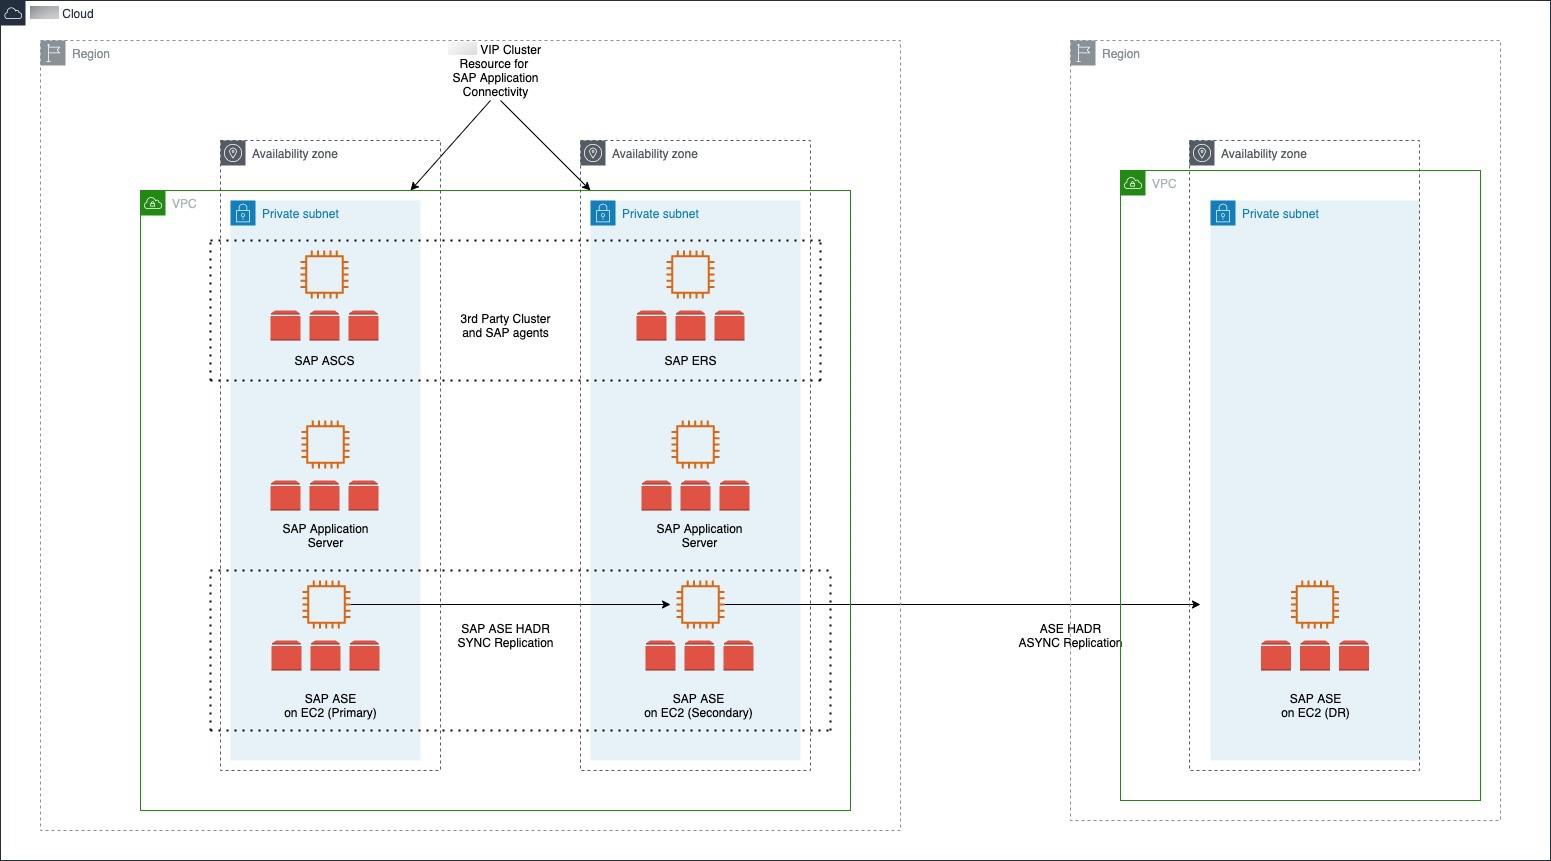 SAP ASE servers on EC2 instances in multiple Availability Zones of one Region with replication to another Region.